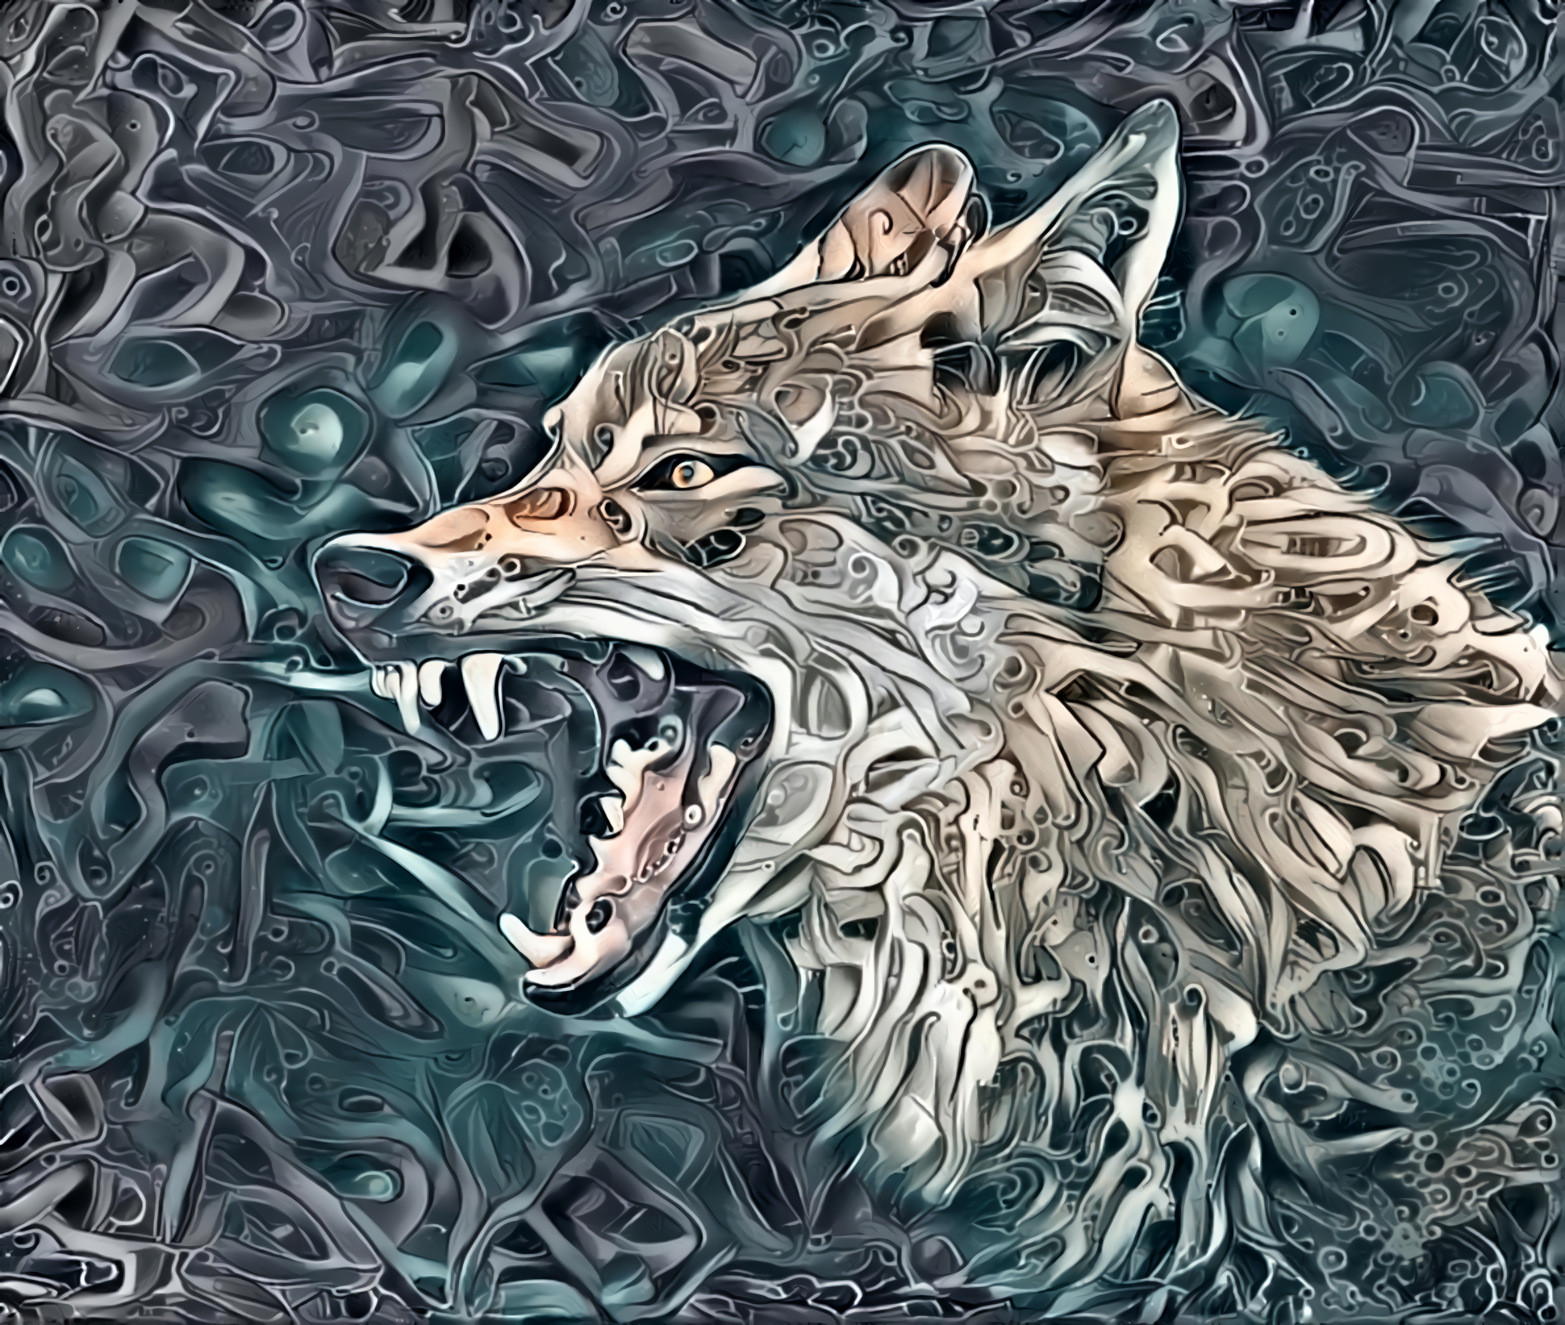 "And then a she-wolf showed herself; she seemed to carry every craving in her leanness; she had already brought despair to many." ~ Dante (Inf. 1.49-51) - Source image by Philipp Pilz on unsplash; style introduced by Thomas Daugherty